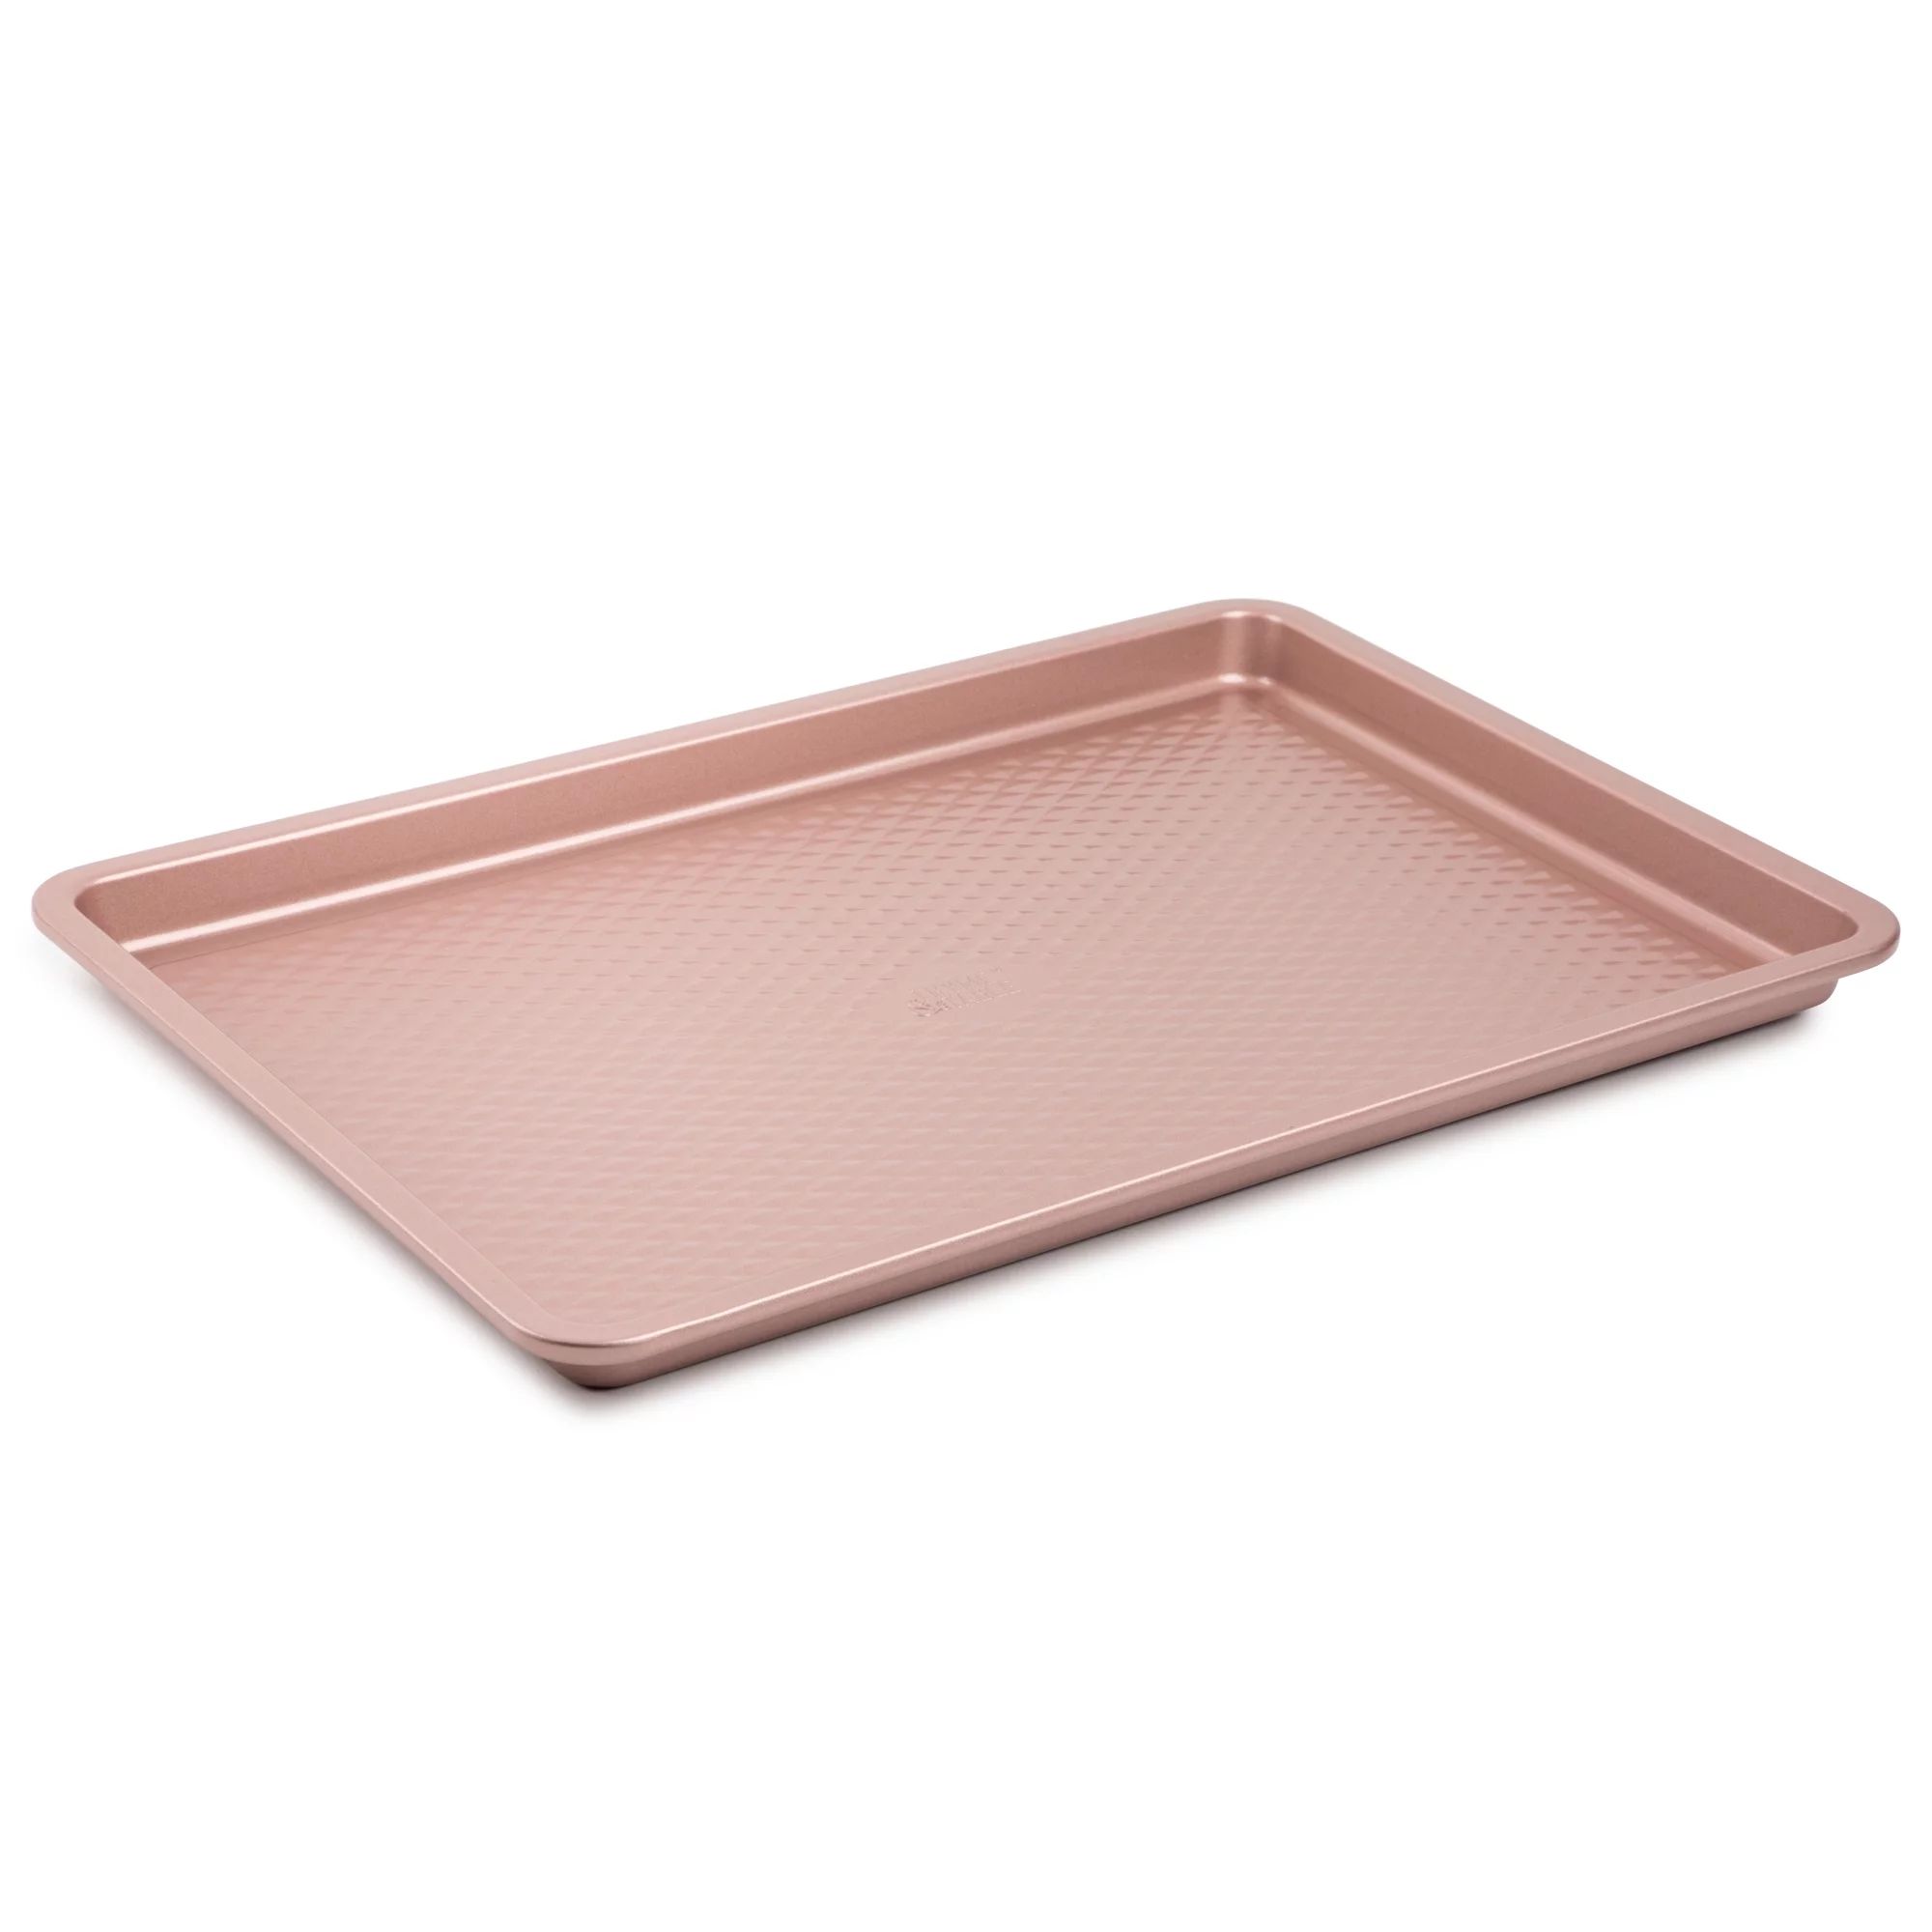 Thyme & Table Non-Stick Cookie Sheet Jelly Roll Pan, 12" x 17", Rose Gold | Walmart (US)